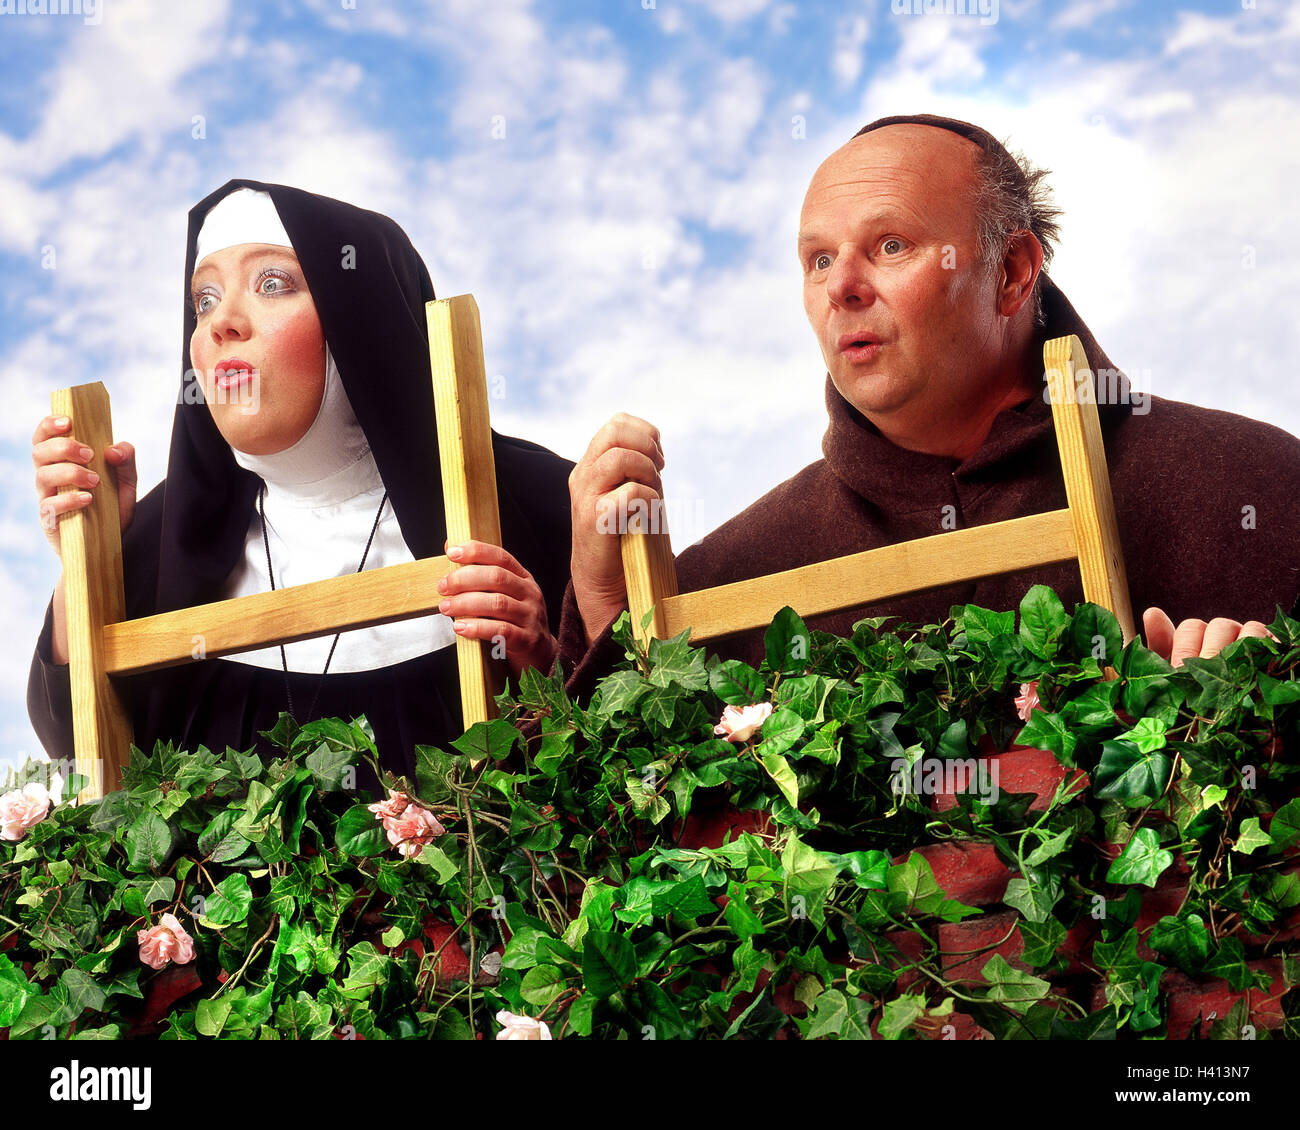 Hedge, monk, nun, conductor, stand, observe facial play, curiosity, astonishment, Composing, professions, studio, order woman, cloister sister, priests, friar, priest, curiously, herübersehen, Catholic, Stock Photo